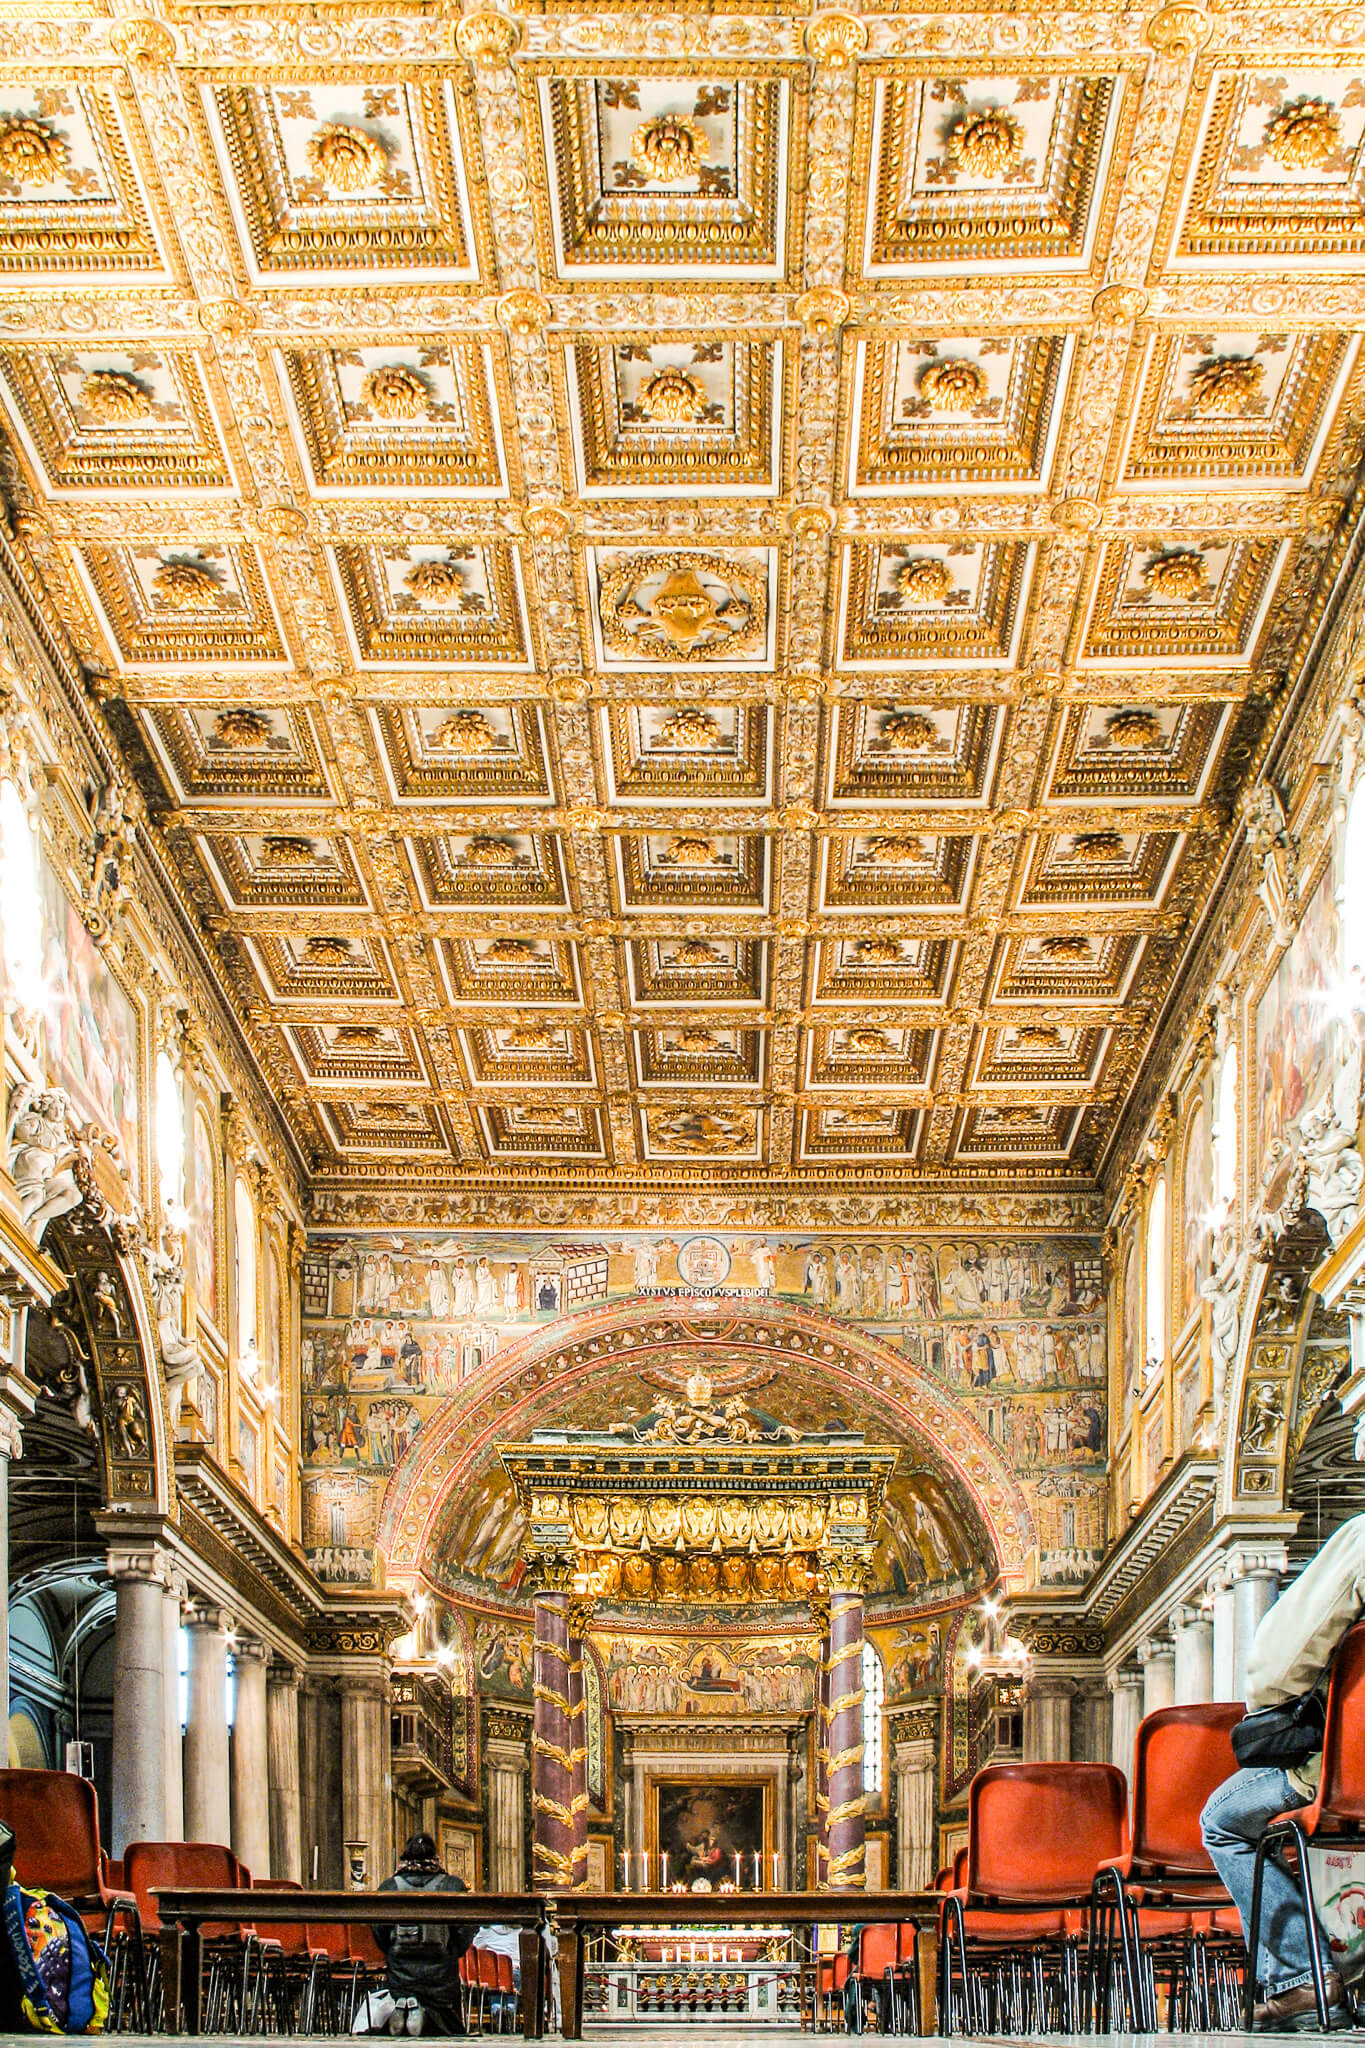 The segmented ceiling and early mosaics in Santa Maria Maggiore in Rome